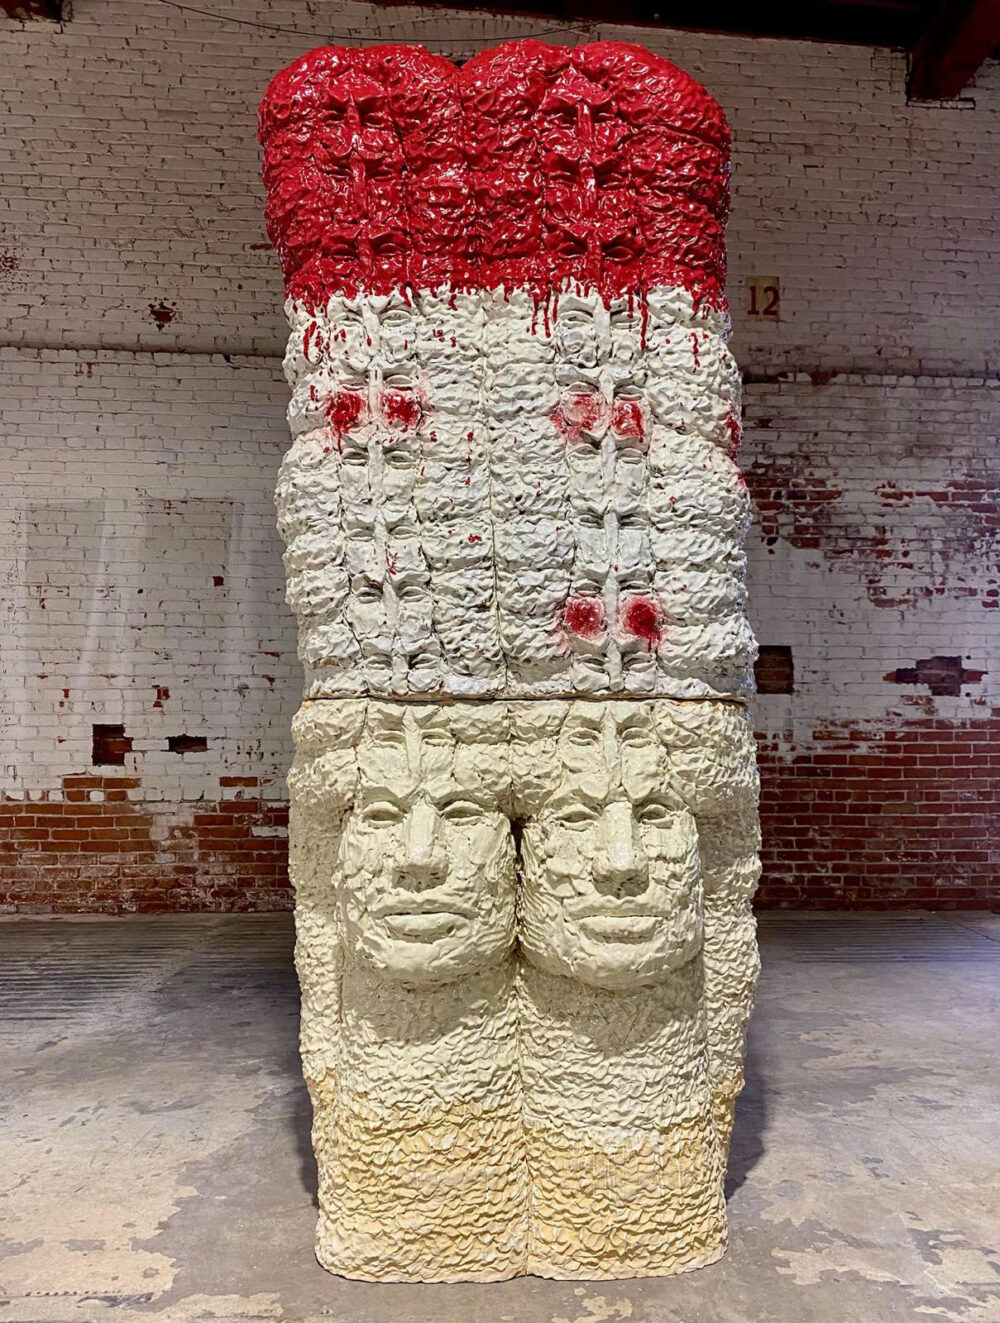 Red, white, and cream colored ceramic sculpture with several faces.